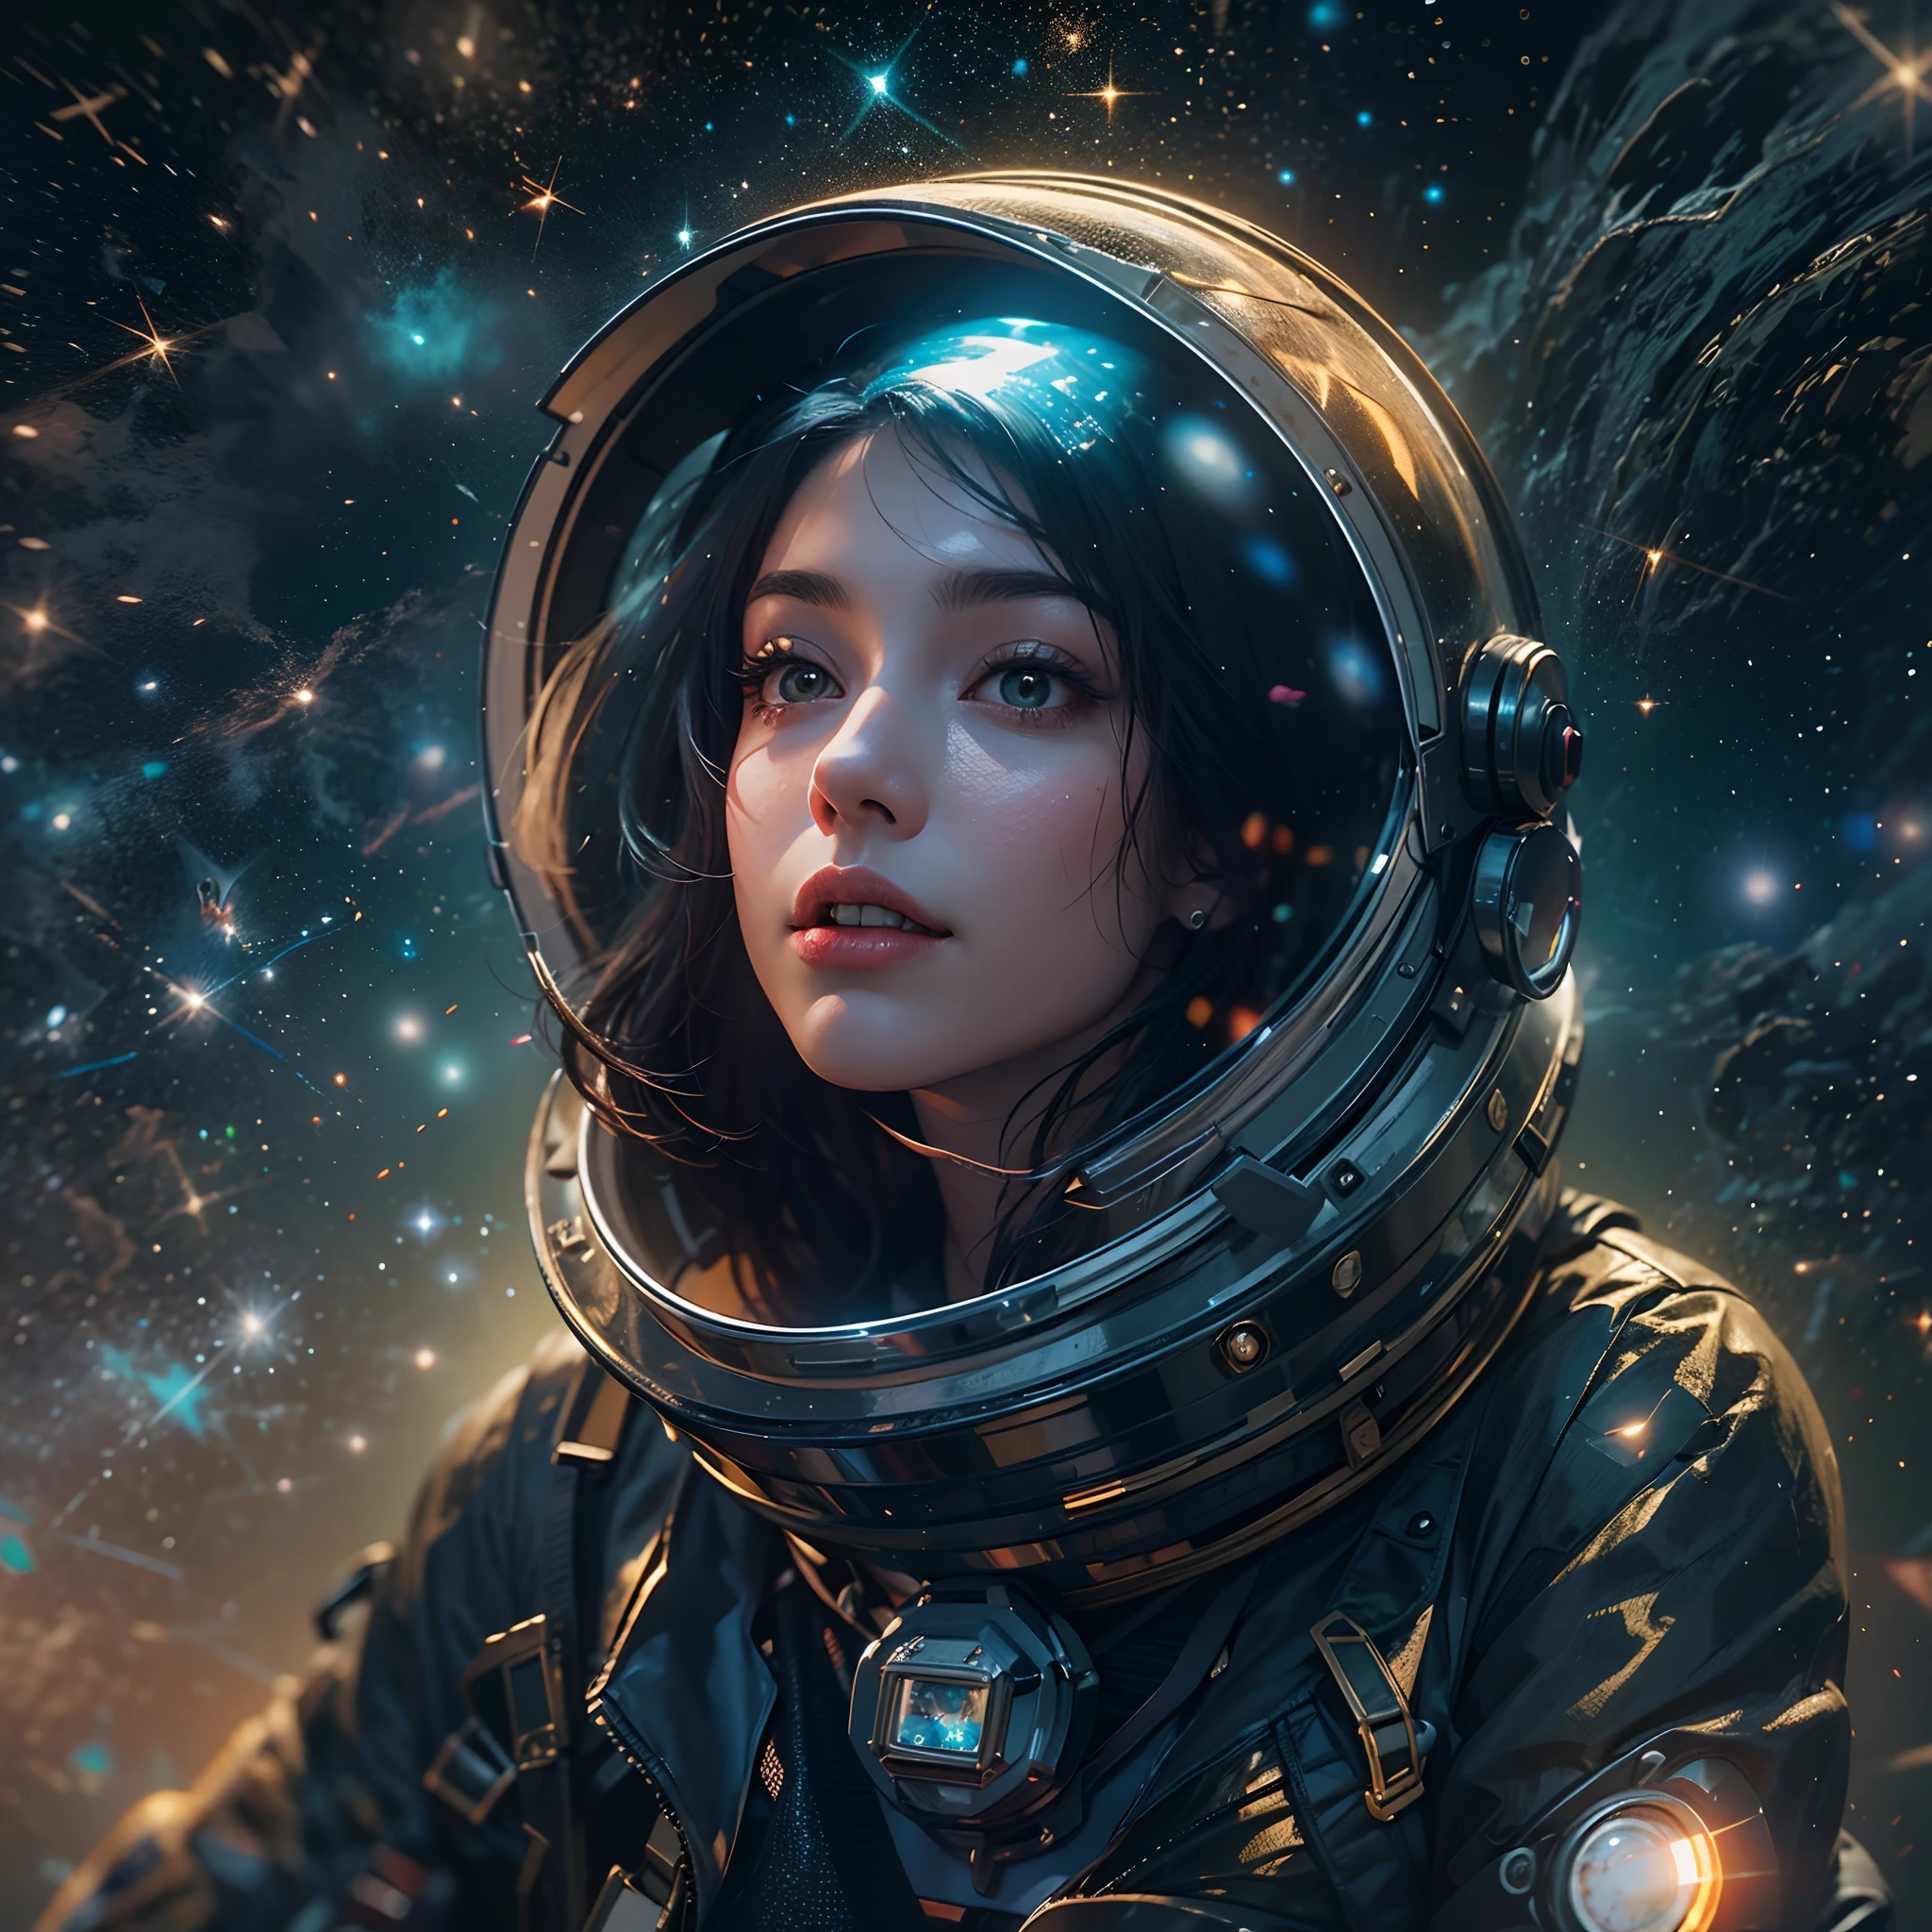 The girl with the pretty face floats in space, portrait of a black-haired young woman in zero gravity, the backdrop of the milky way and a supermassive black hole as background，Wearing high-tech tight spacesuits,  There's a huge black hole forming behind it, and the stars behind her swim past ，The girl with the beautiful face stood in the center of the planet, and countless golden meteors converged on her.LightPainting, holographic，Center symmetrical composition，Axisymmetric composition，realistic，skin textures，anatomy correct